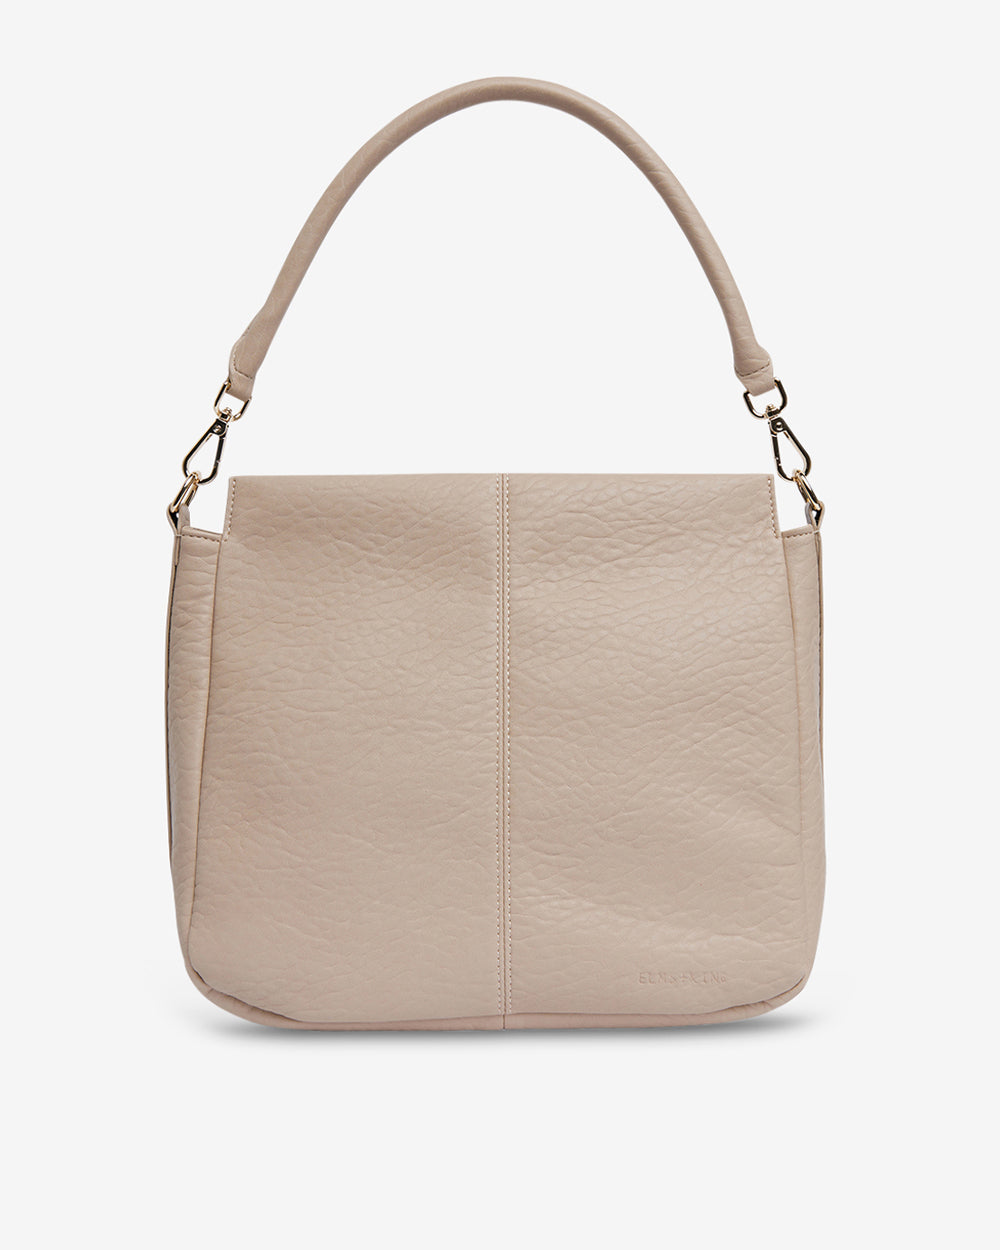 Bellevue Tote - Oyster